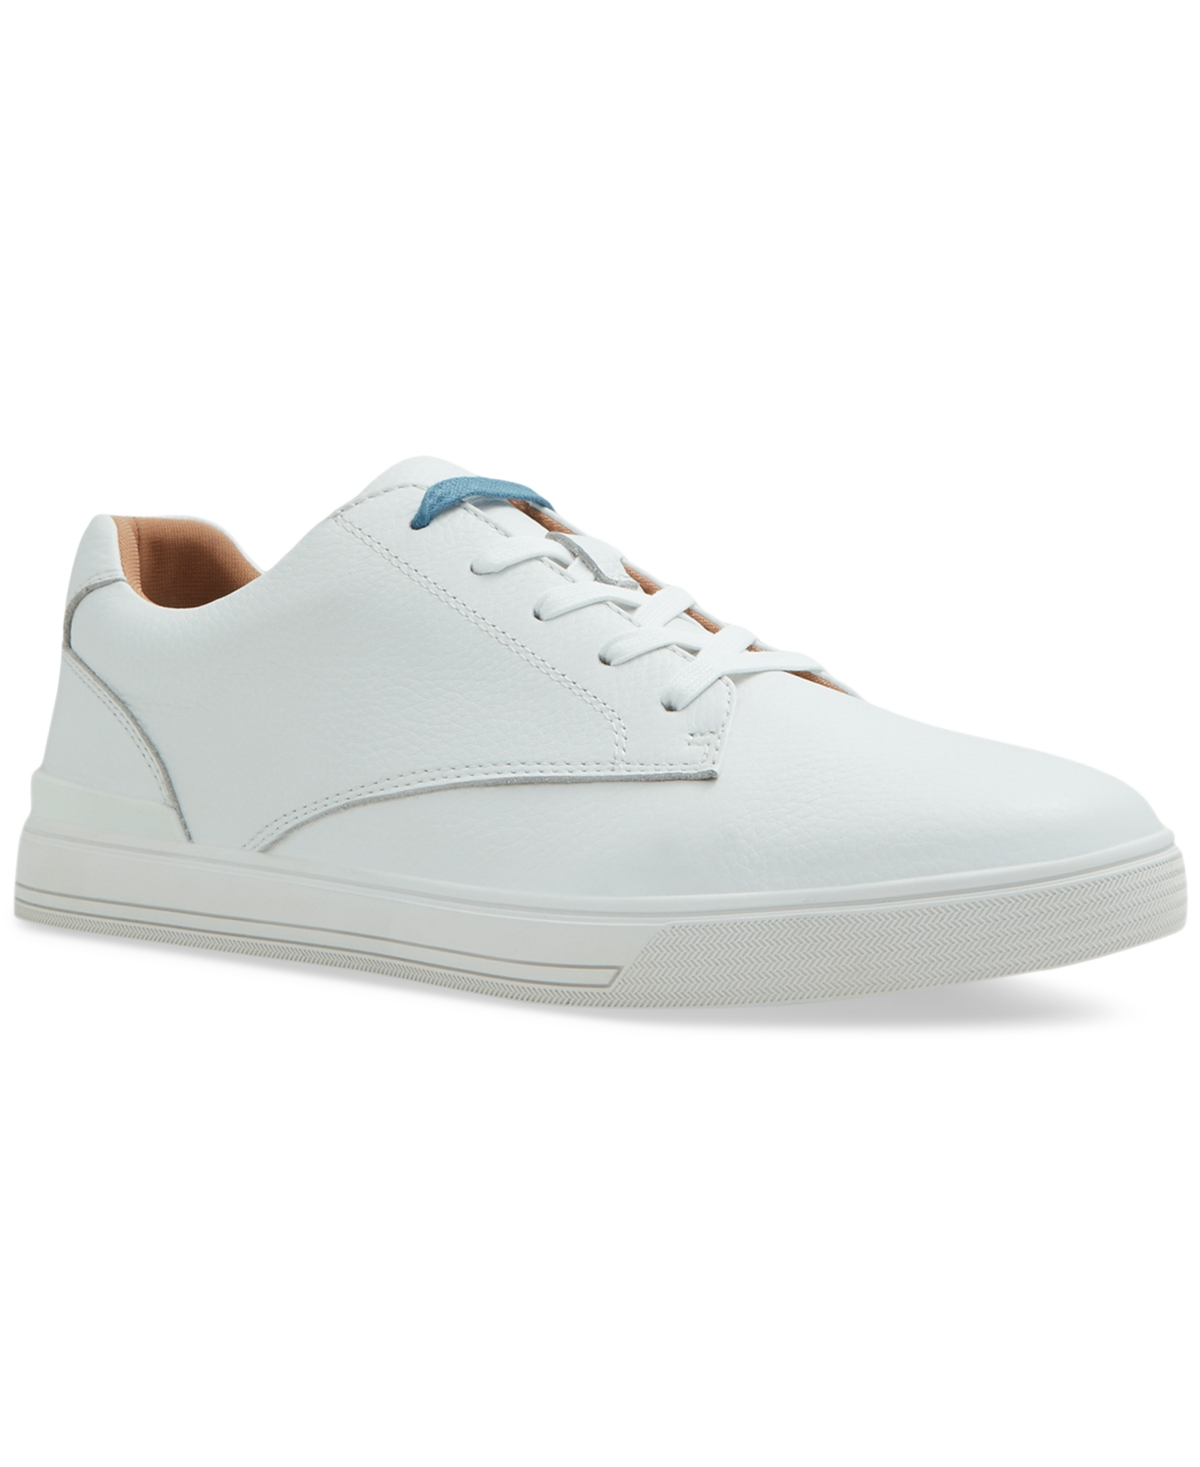 Men's Brentford Lace-Up Sneakers - White